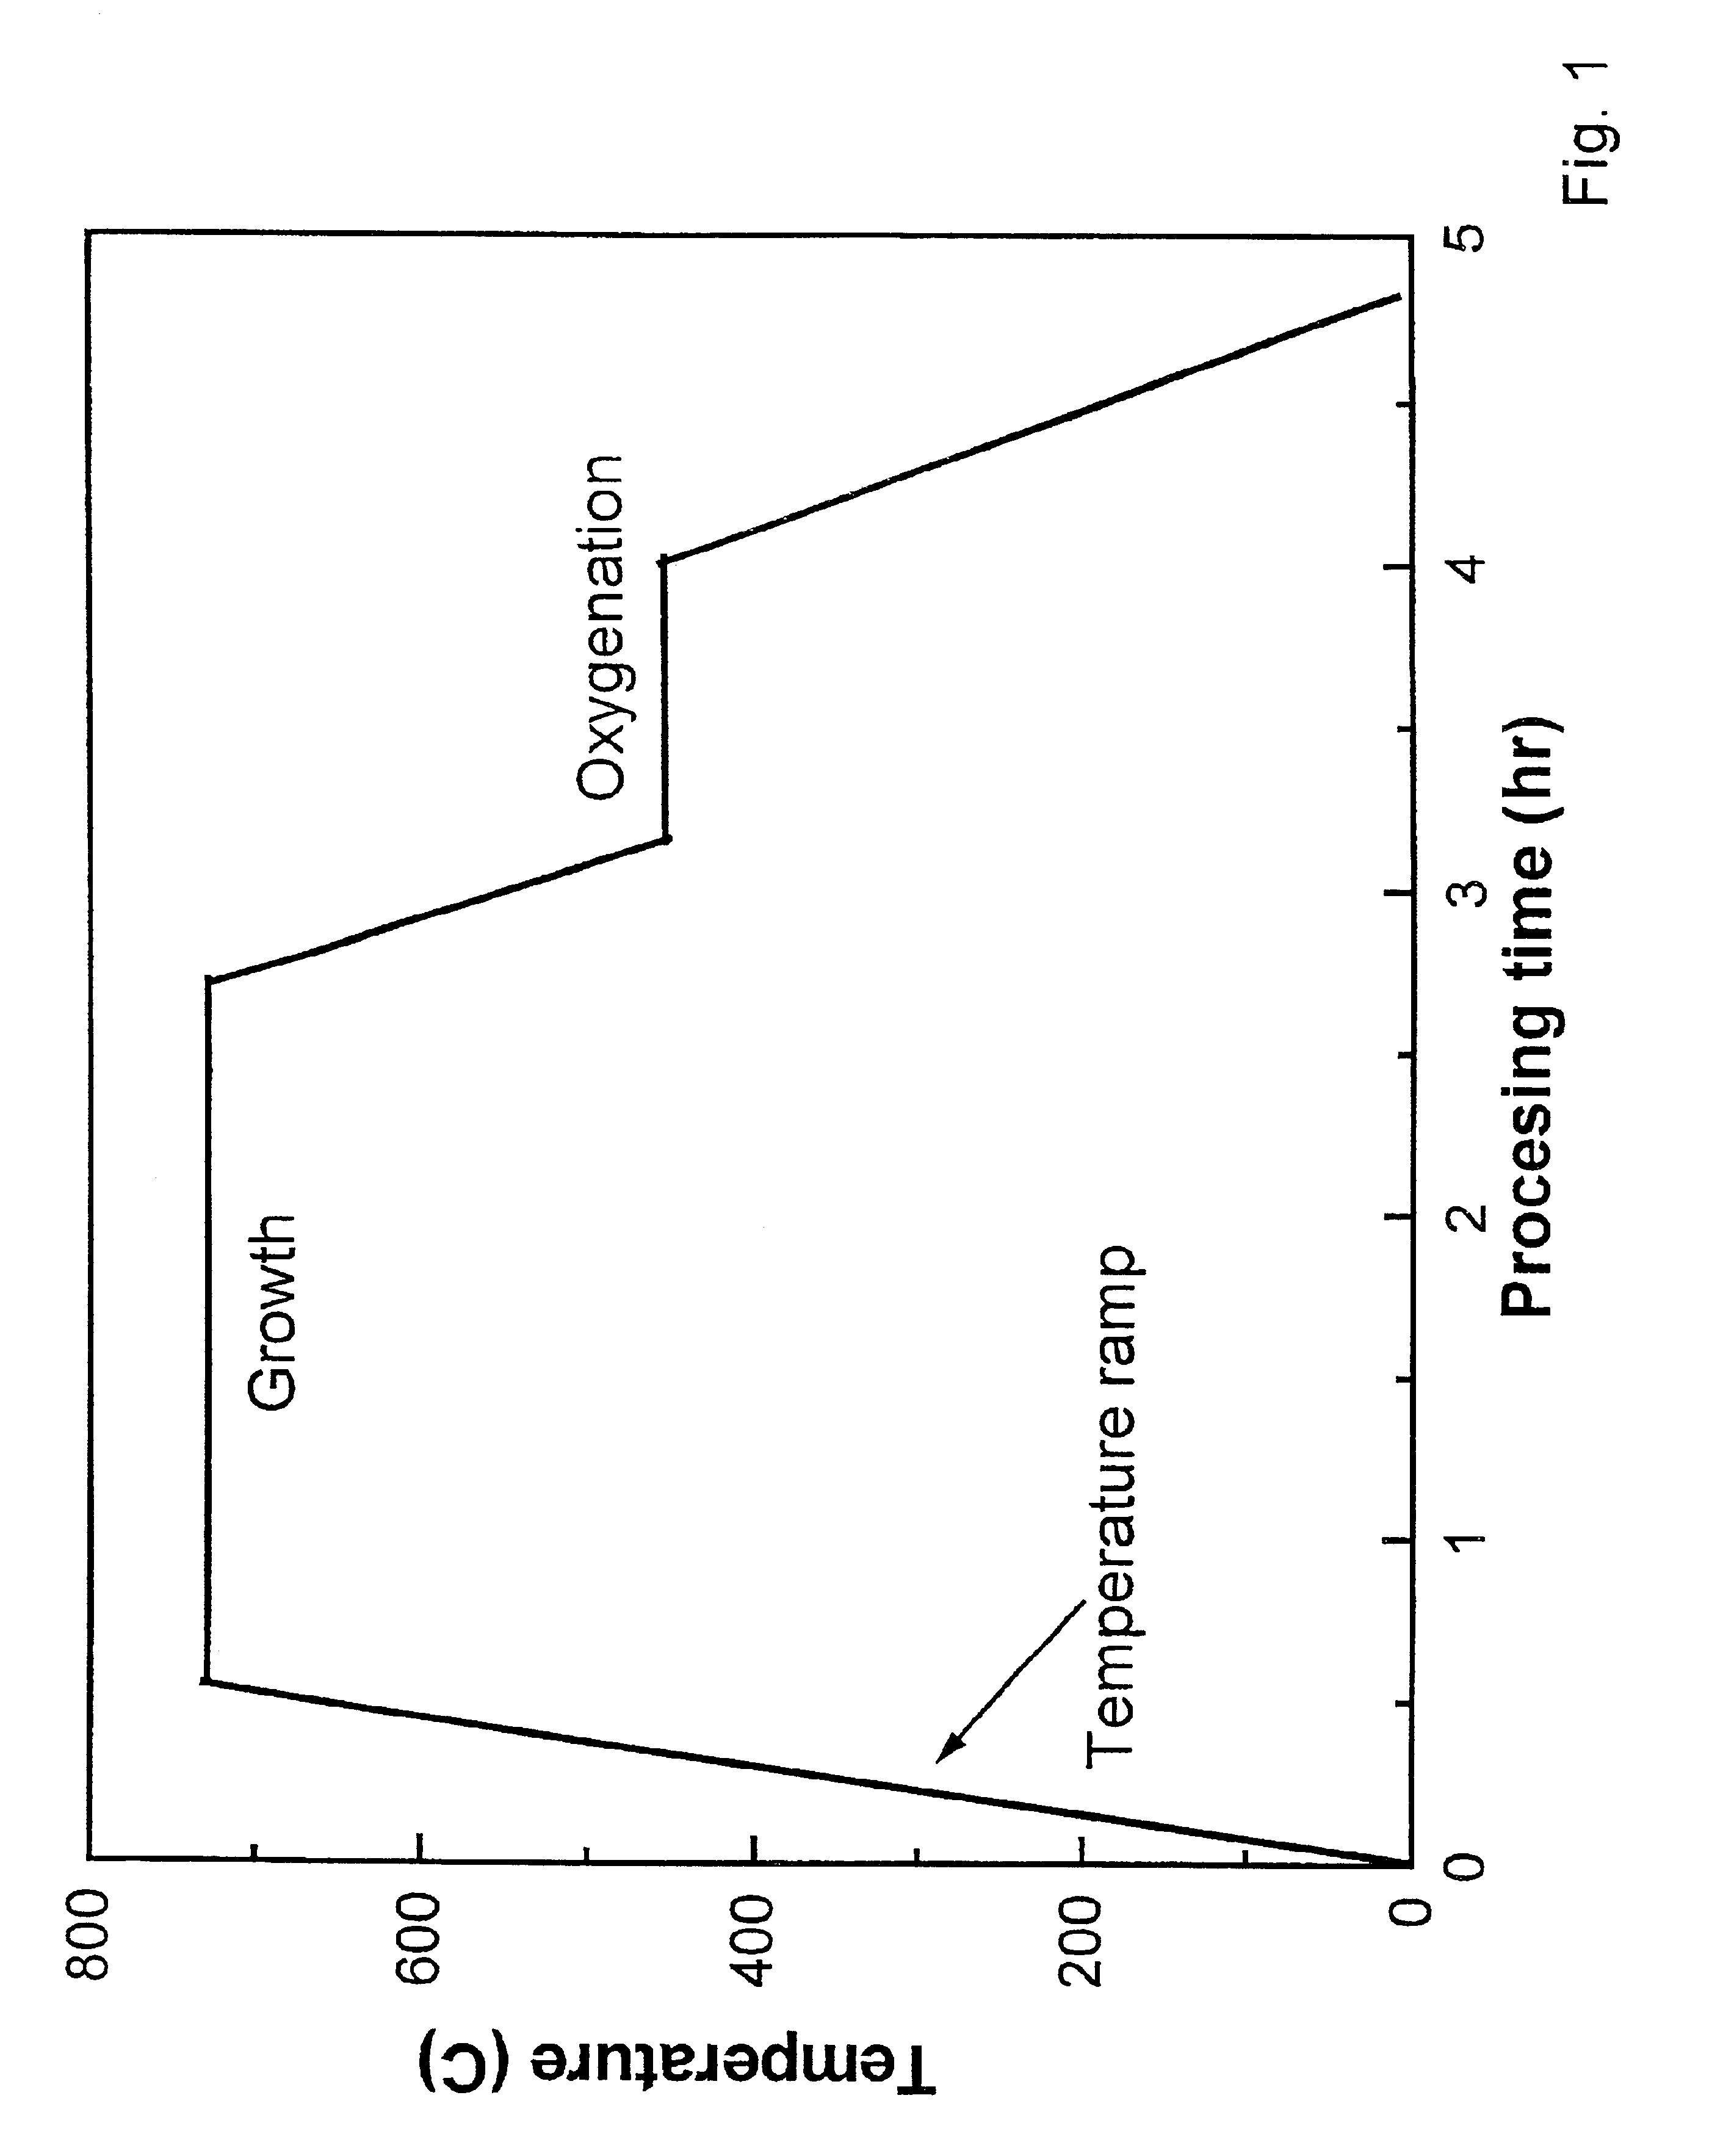 Synthesis of YBa2CU3O7 using sub-atmospheric processing